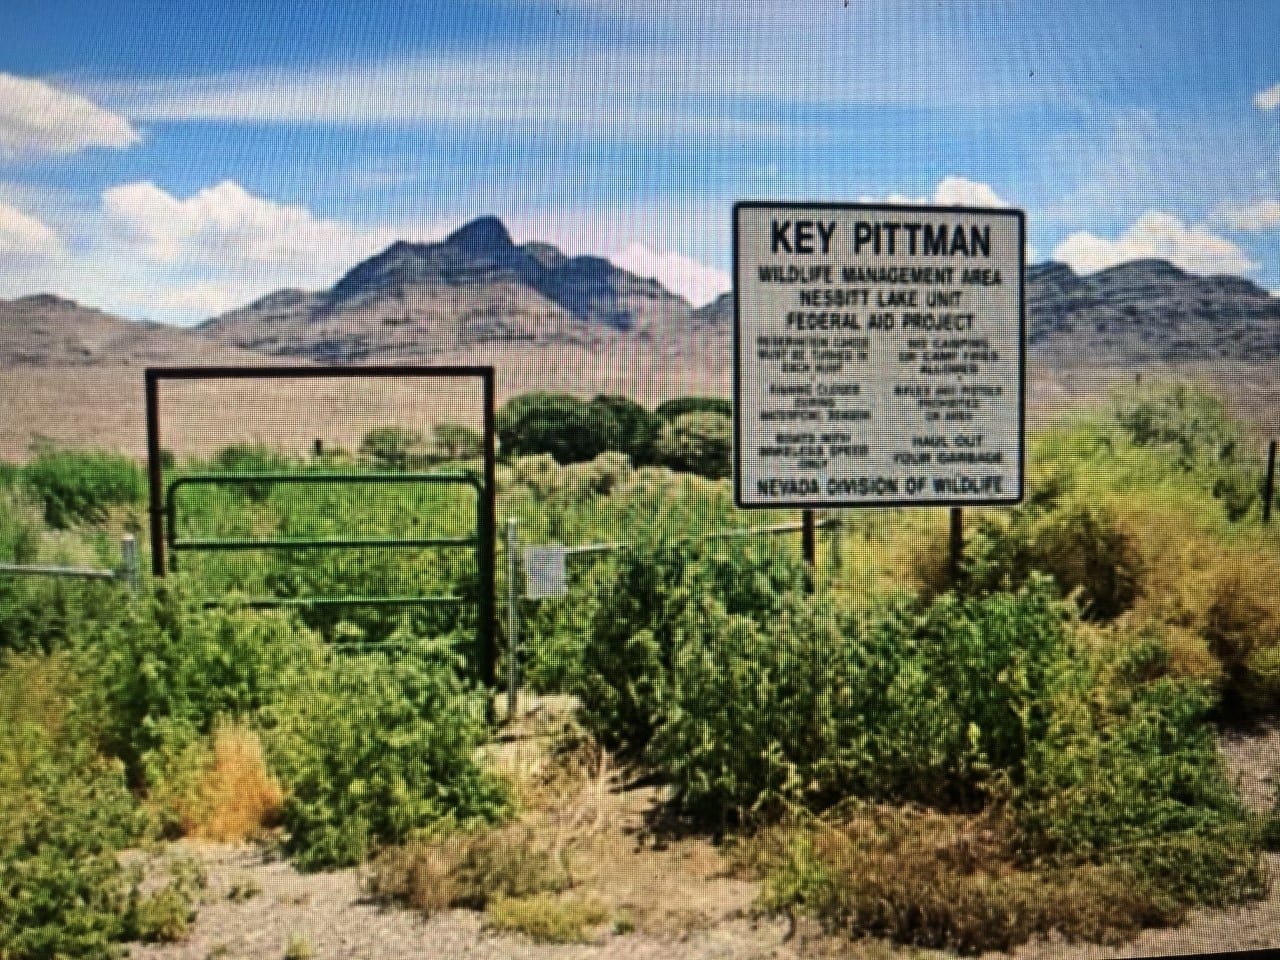 2.61 Acres in Beautiful Crystal Springs Adjacent to Key Pittman Wildlife Area/Lake & Fronts NV State Highway SR-318 photo 13